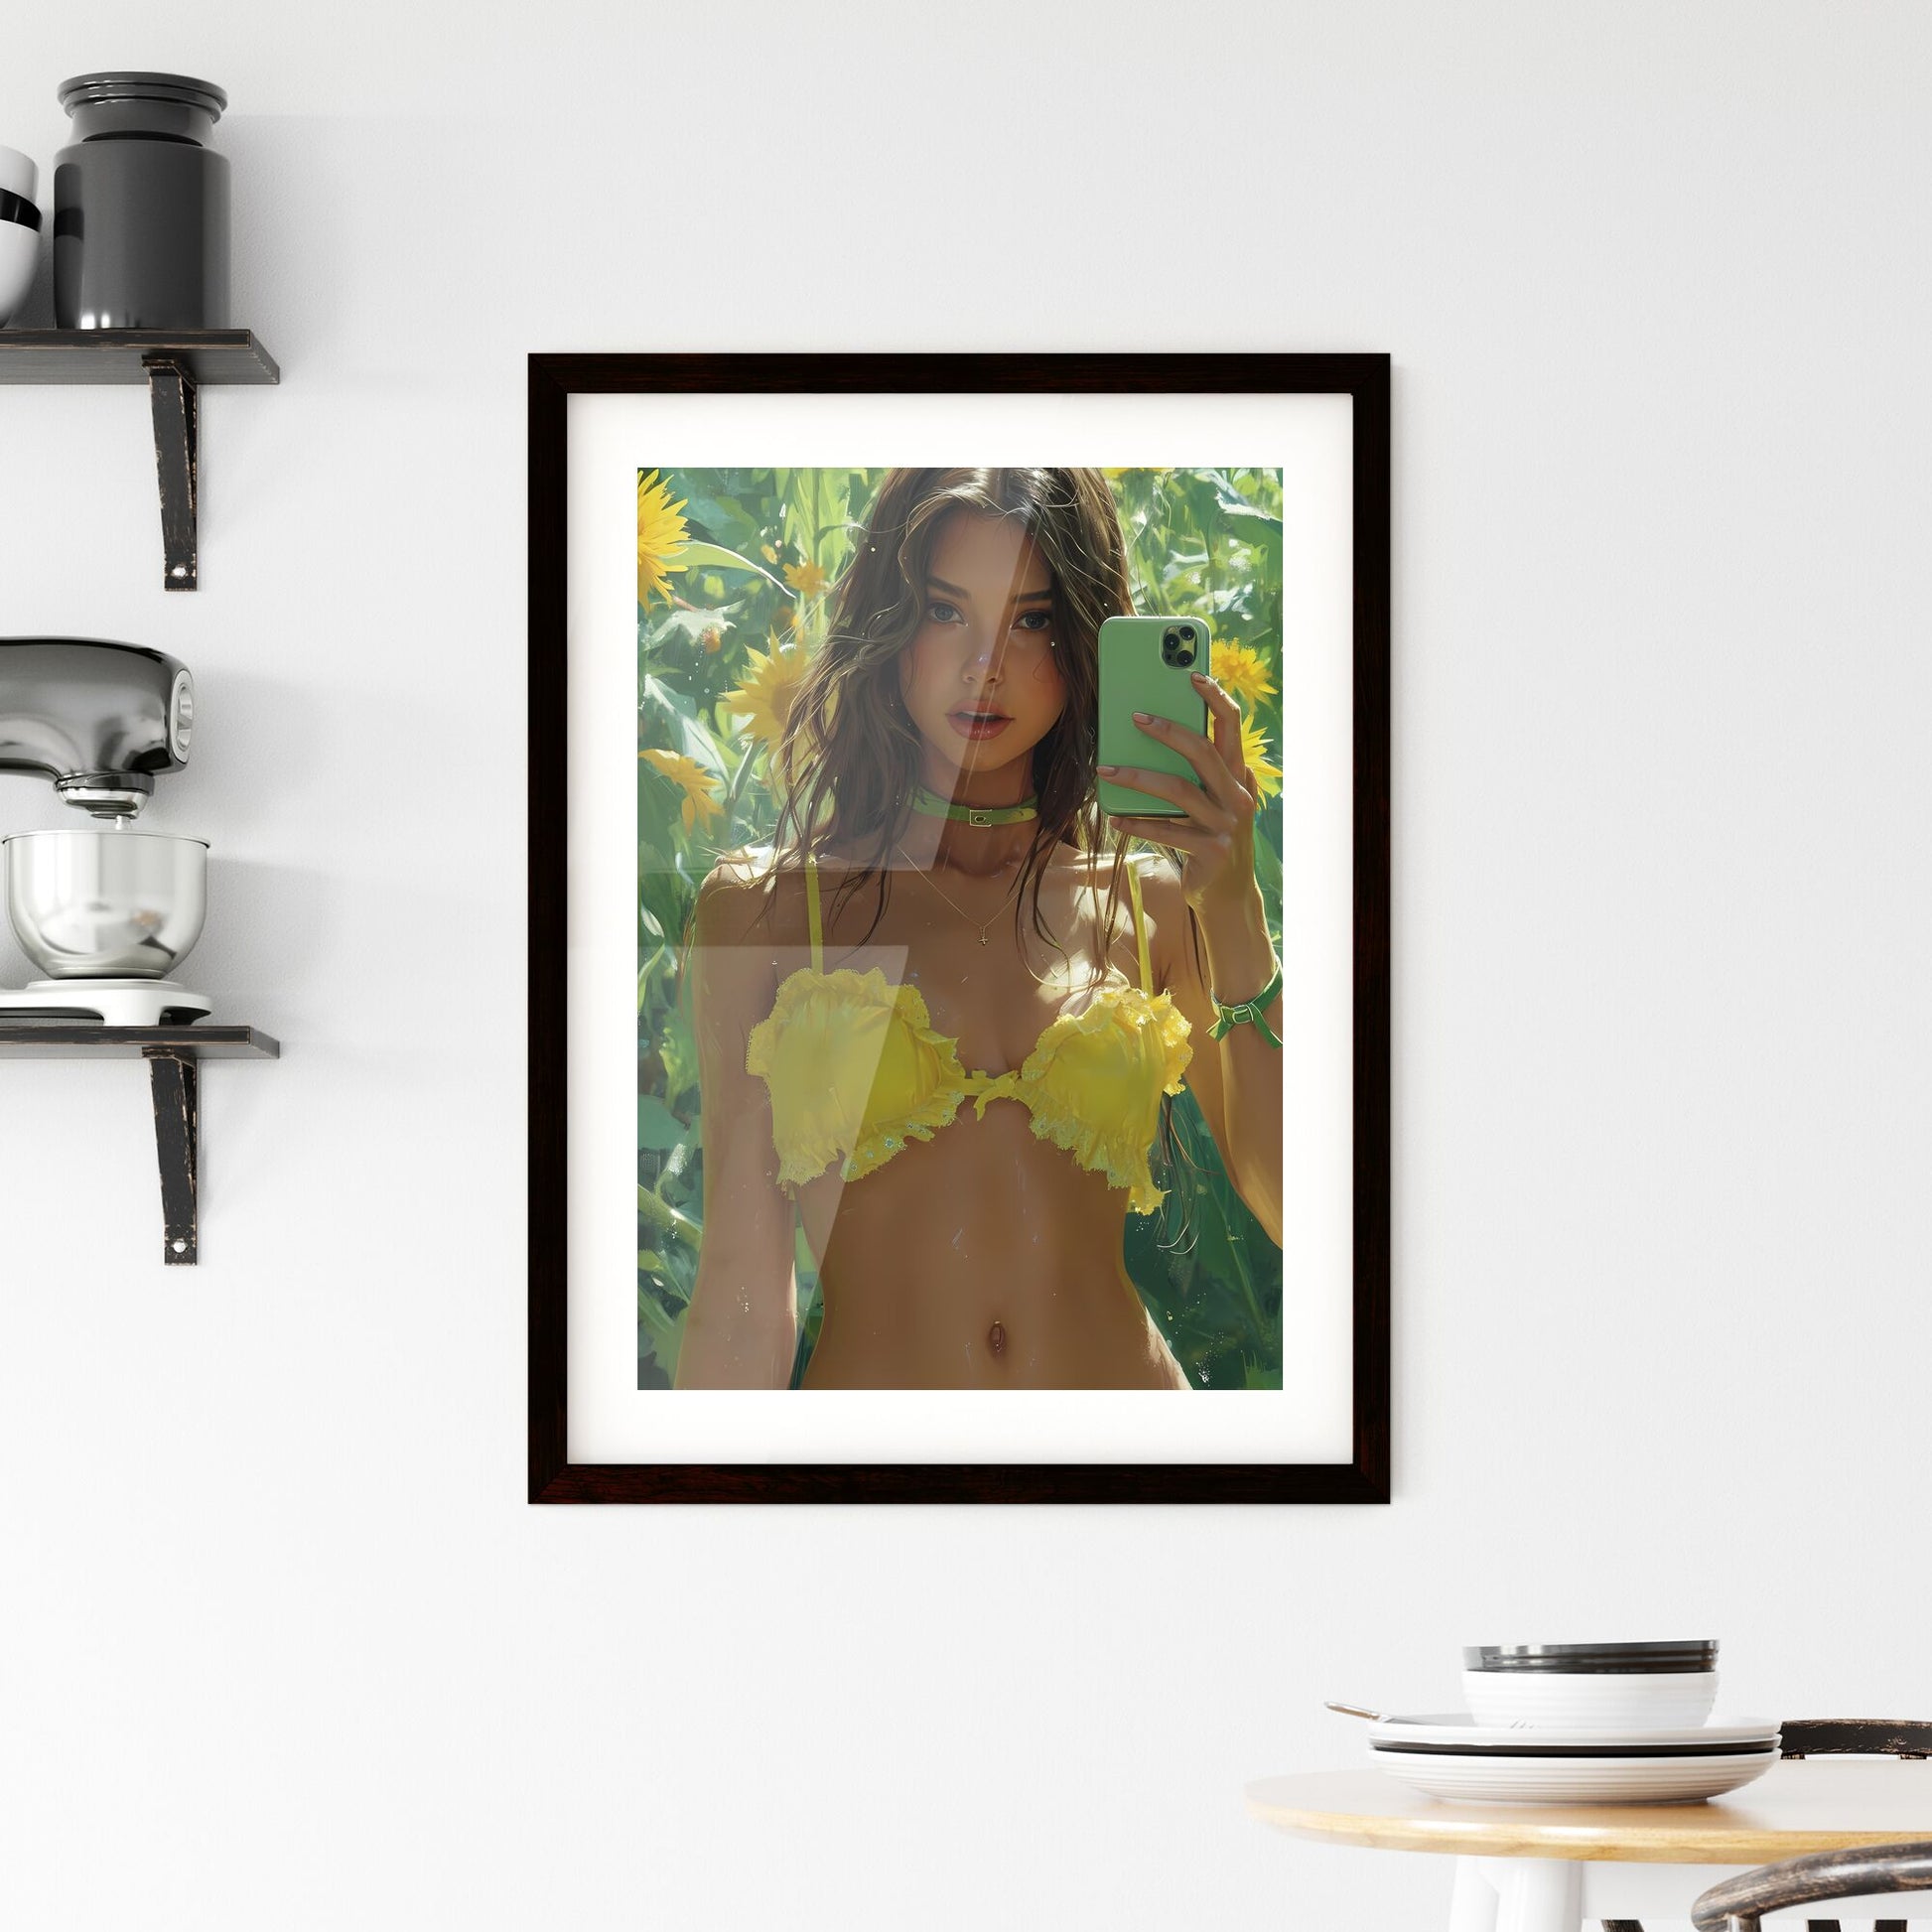 Surprised woman with beautiful legs taking pictures of herself with iPhone - Art print of a woman taking a selfie in a yellow garment Default Title